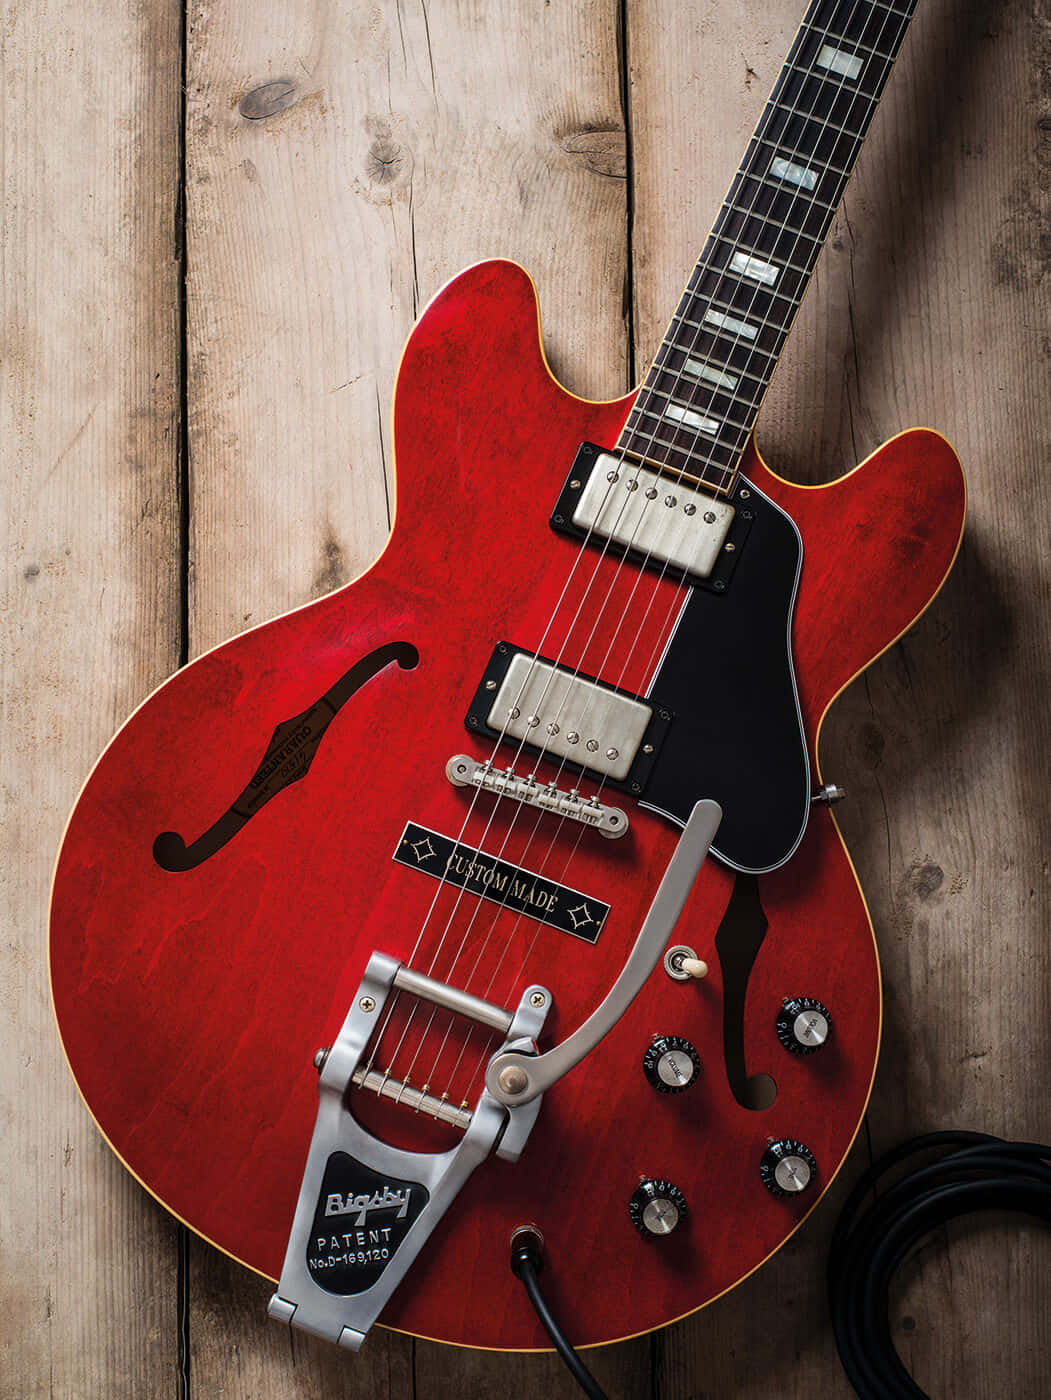 Gibson 335 On Wooden Surface Wallpaper